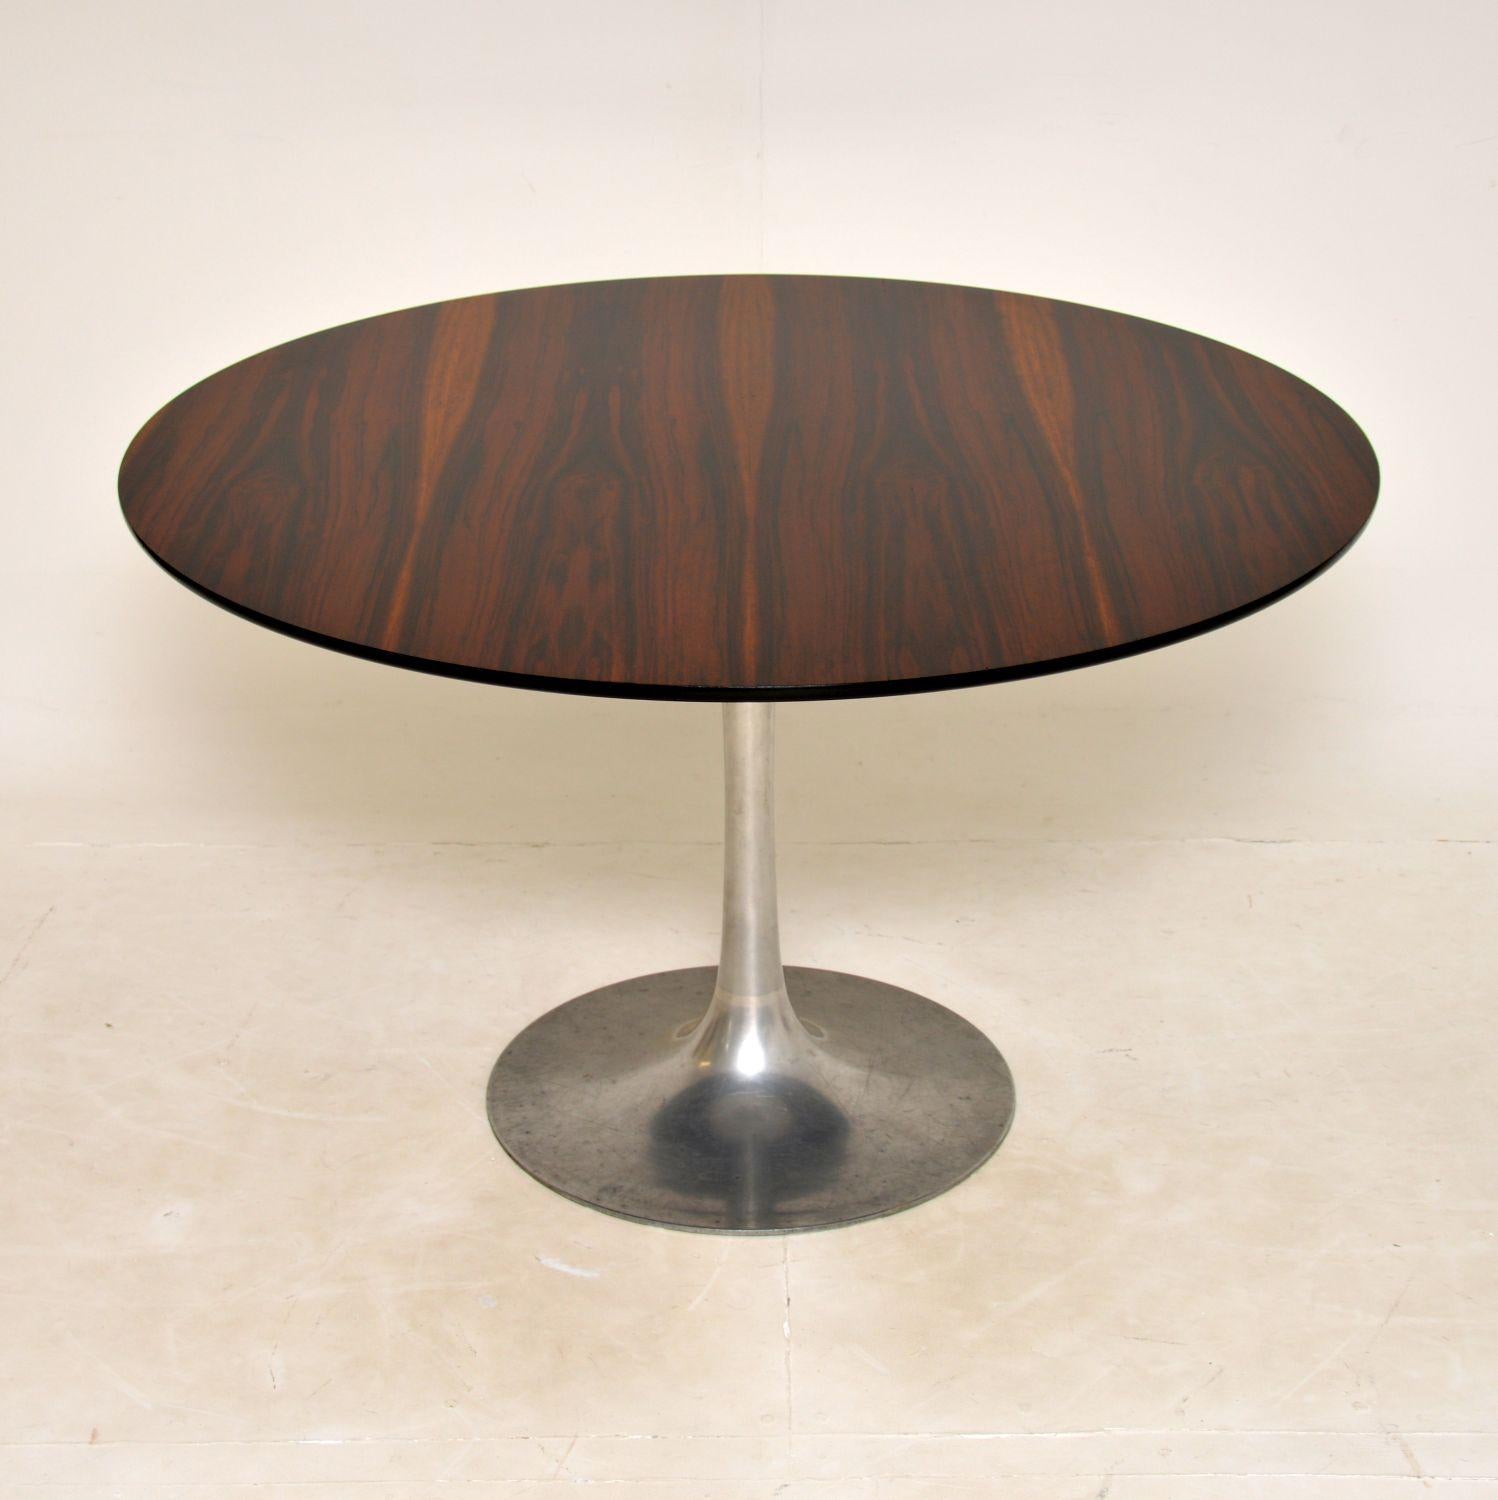 A stunning and very rare vintage circular tulip dining table, designed by Maurice Burke for Arkana. This was made in England, it dates from the 1960’s.

This rare version has a stunning circular wood top, and a brushed steel weighted tulip